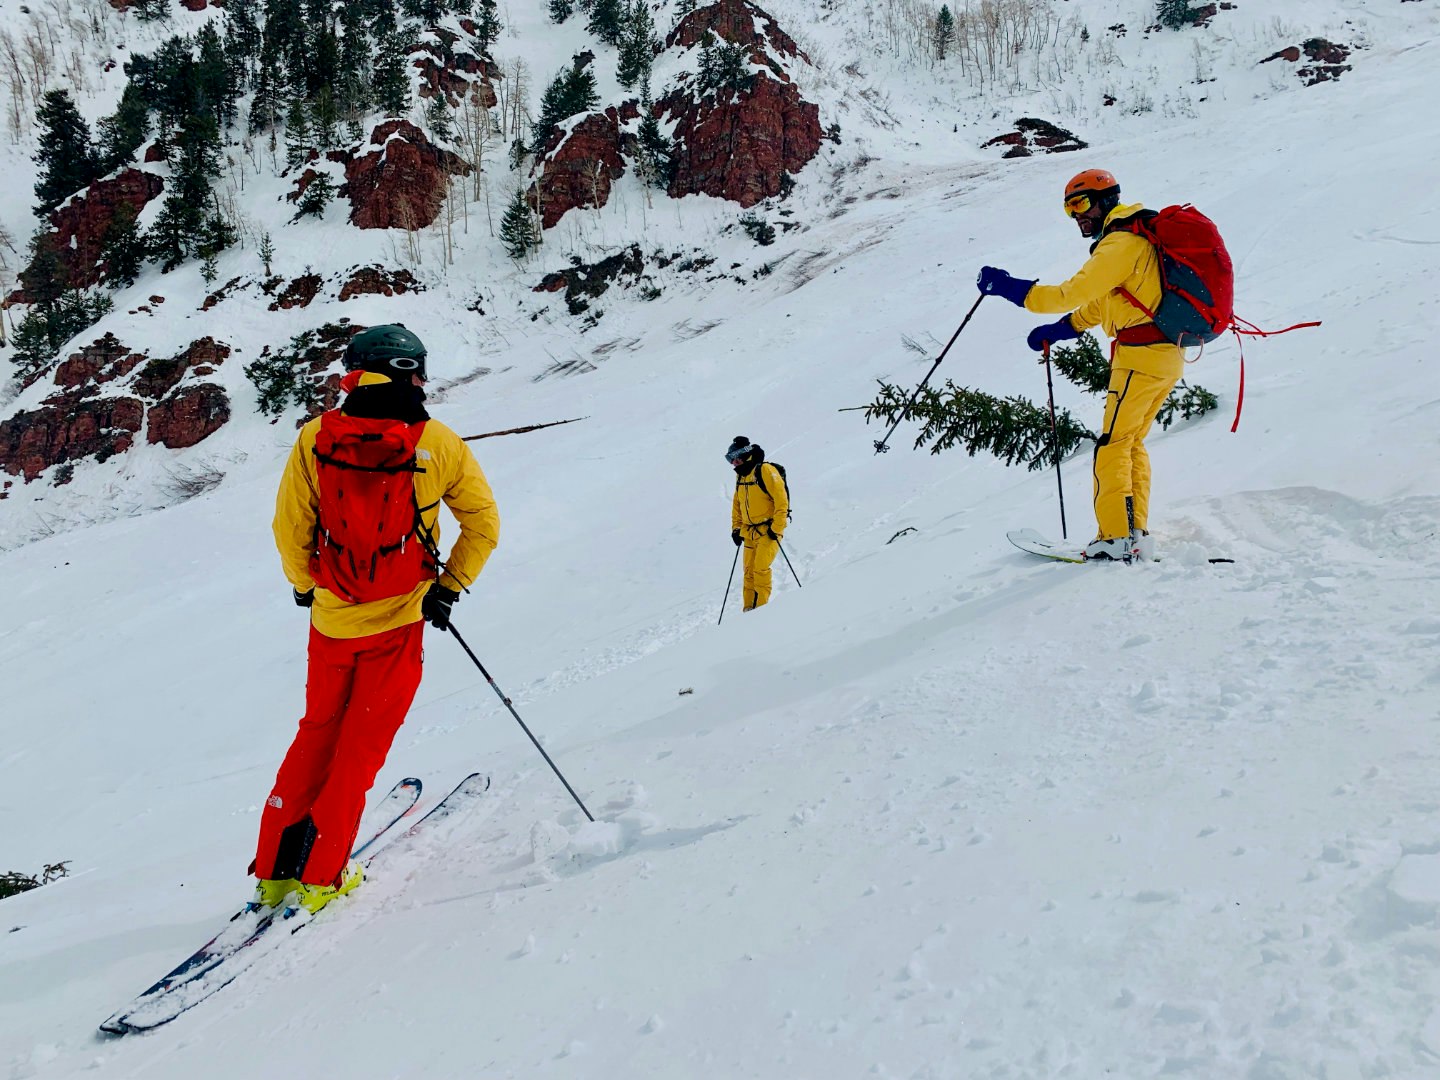 Three skiers descend a slope in Aspen thickly covered with snow. All are wearing yellow and red FutureLight pants and jackets from North Face. In the background are large boulders and trees. 